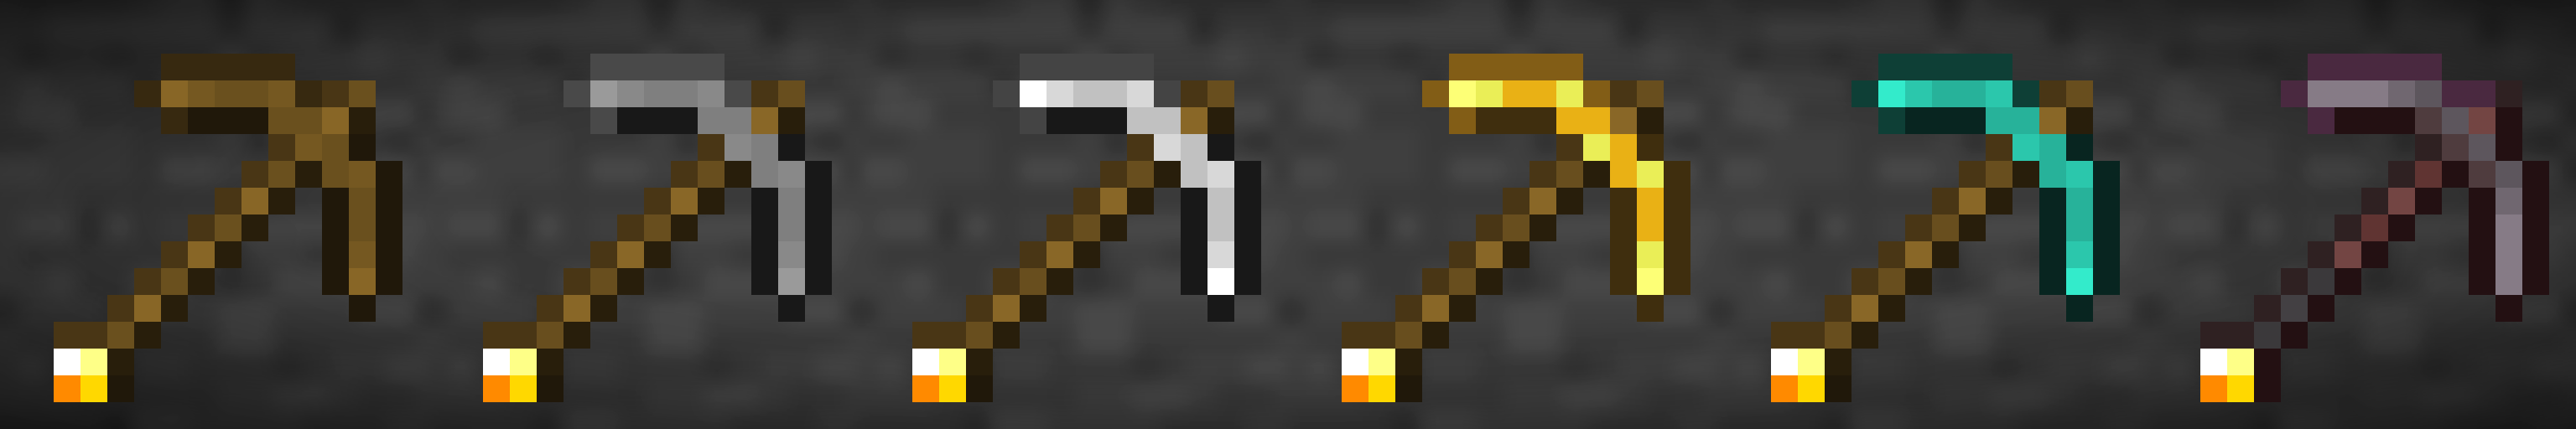 Image of glowing legacy pickaxes